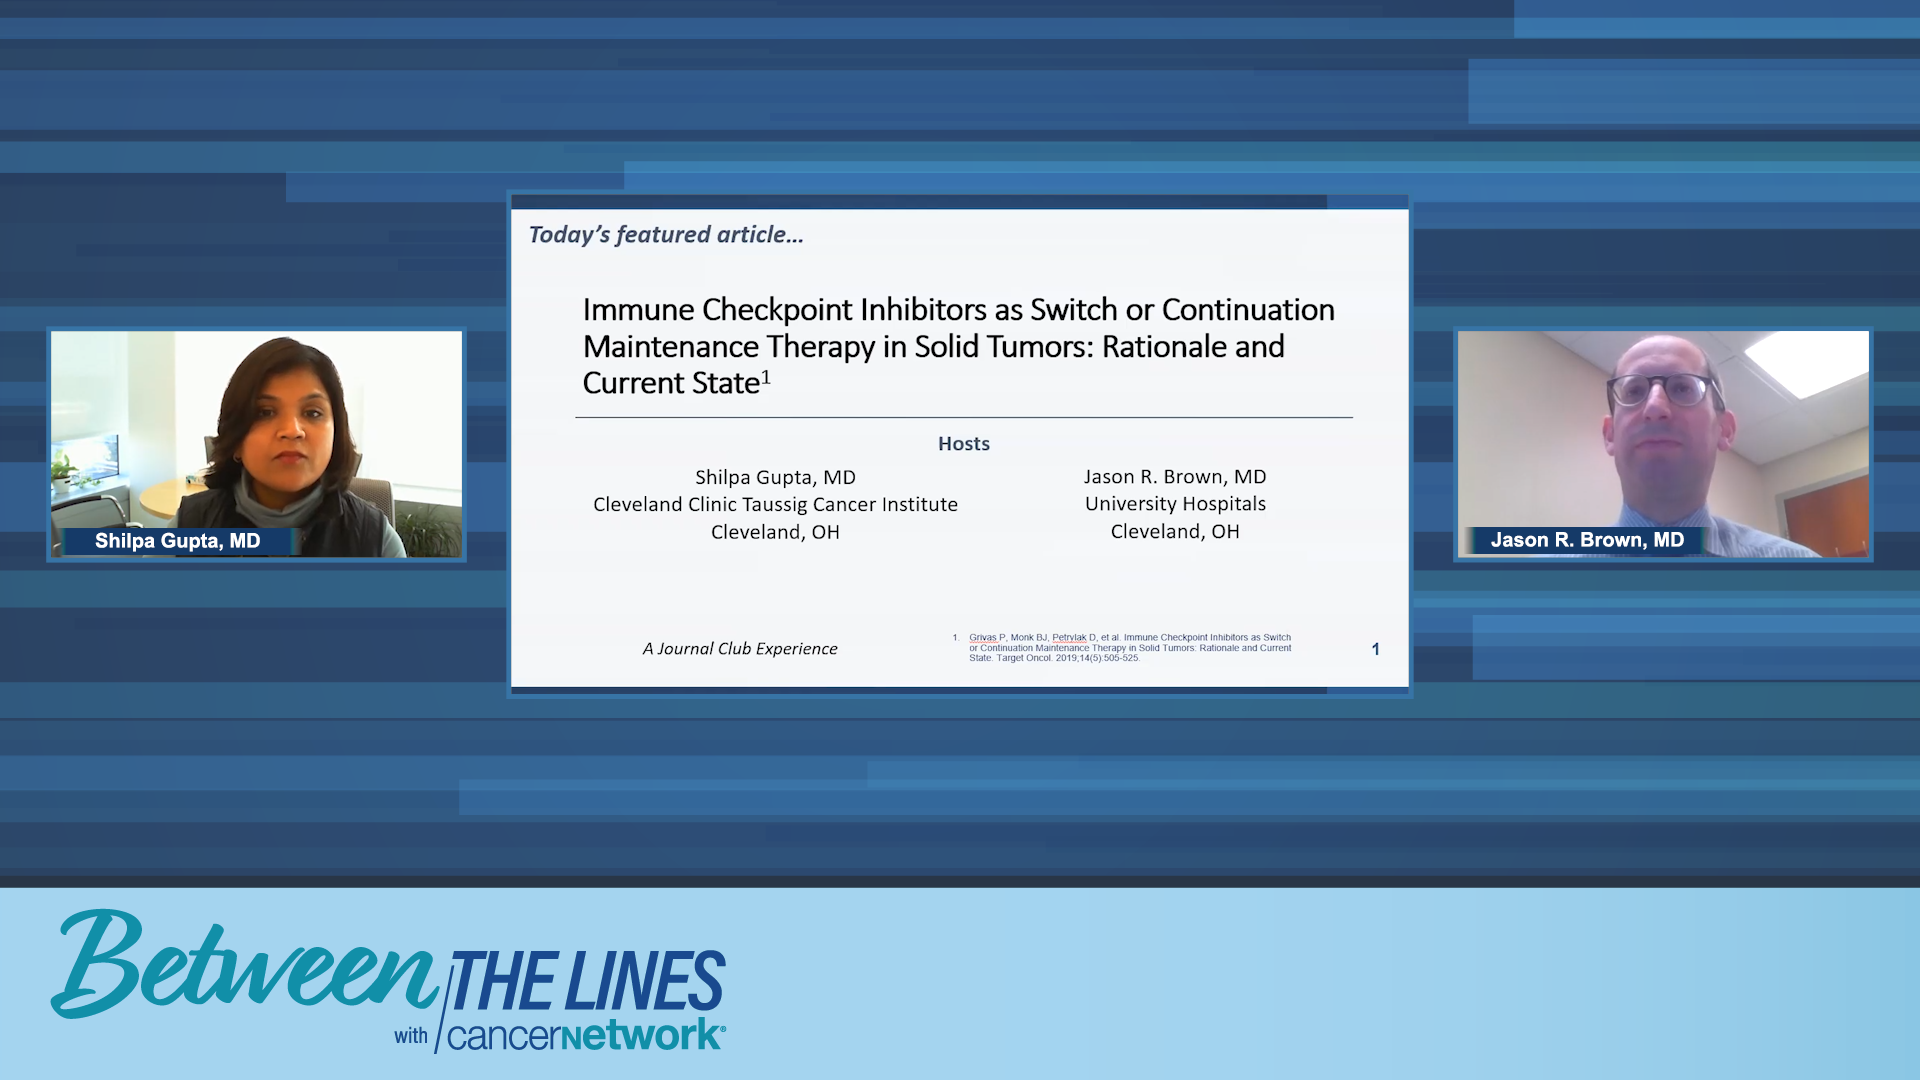 Immune Checkpoint Inhibitors as Switch or Continuous Maintenance Therapy in Solid Tumors: Rationale and Current State